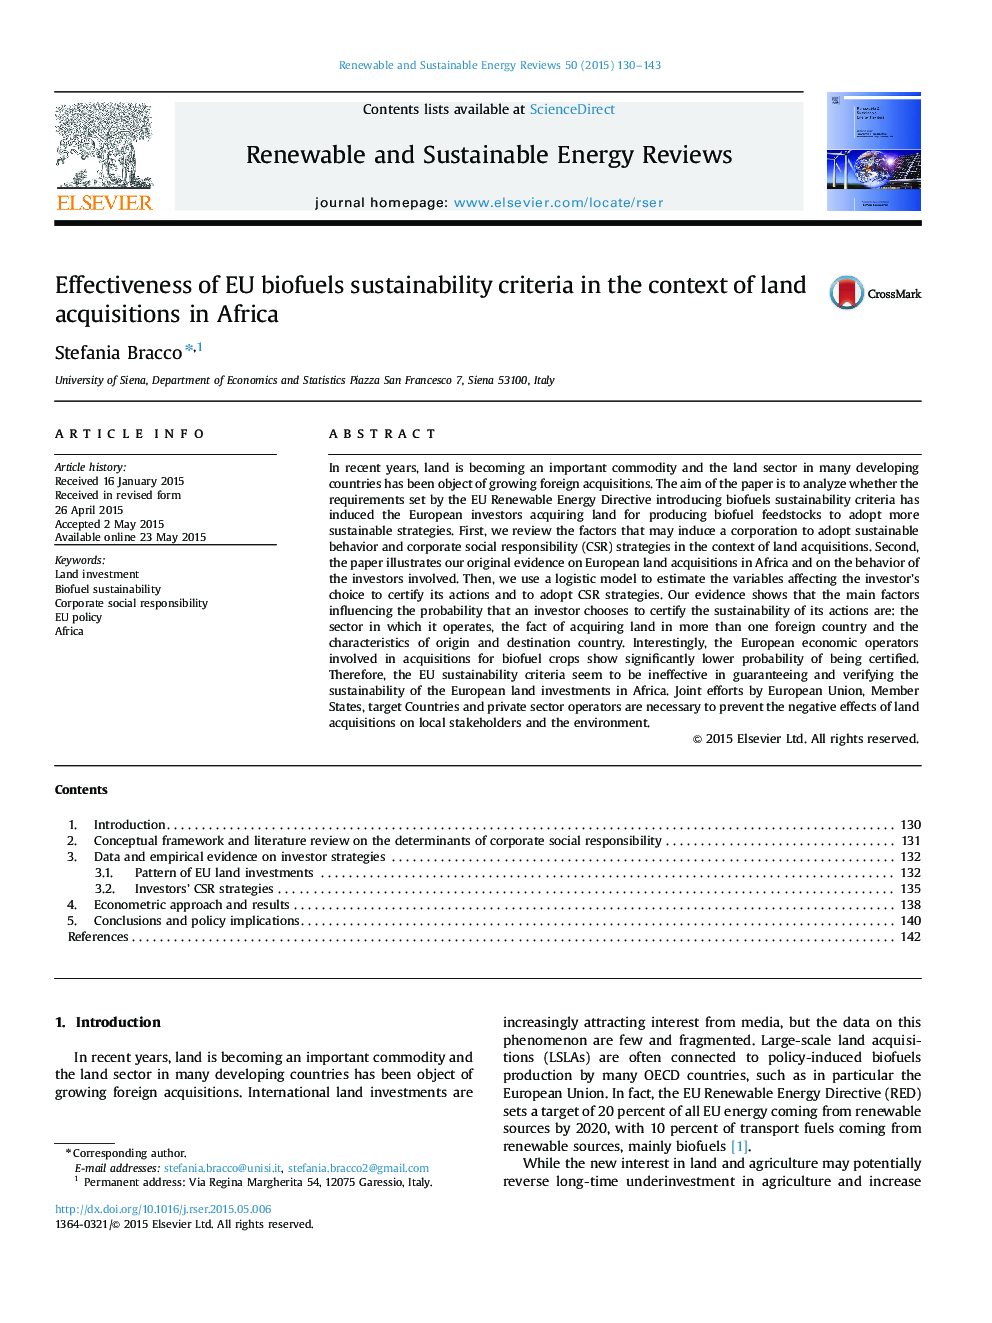 Effectiveness of EU biofuels sustainability criteria in the context of land acquisitions in Africa